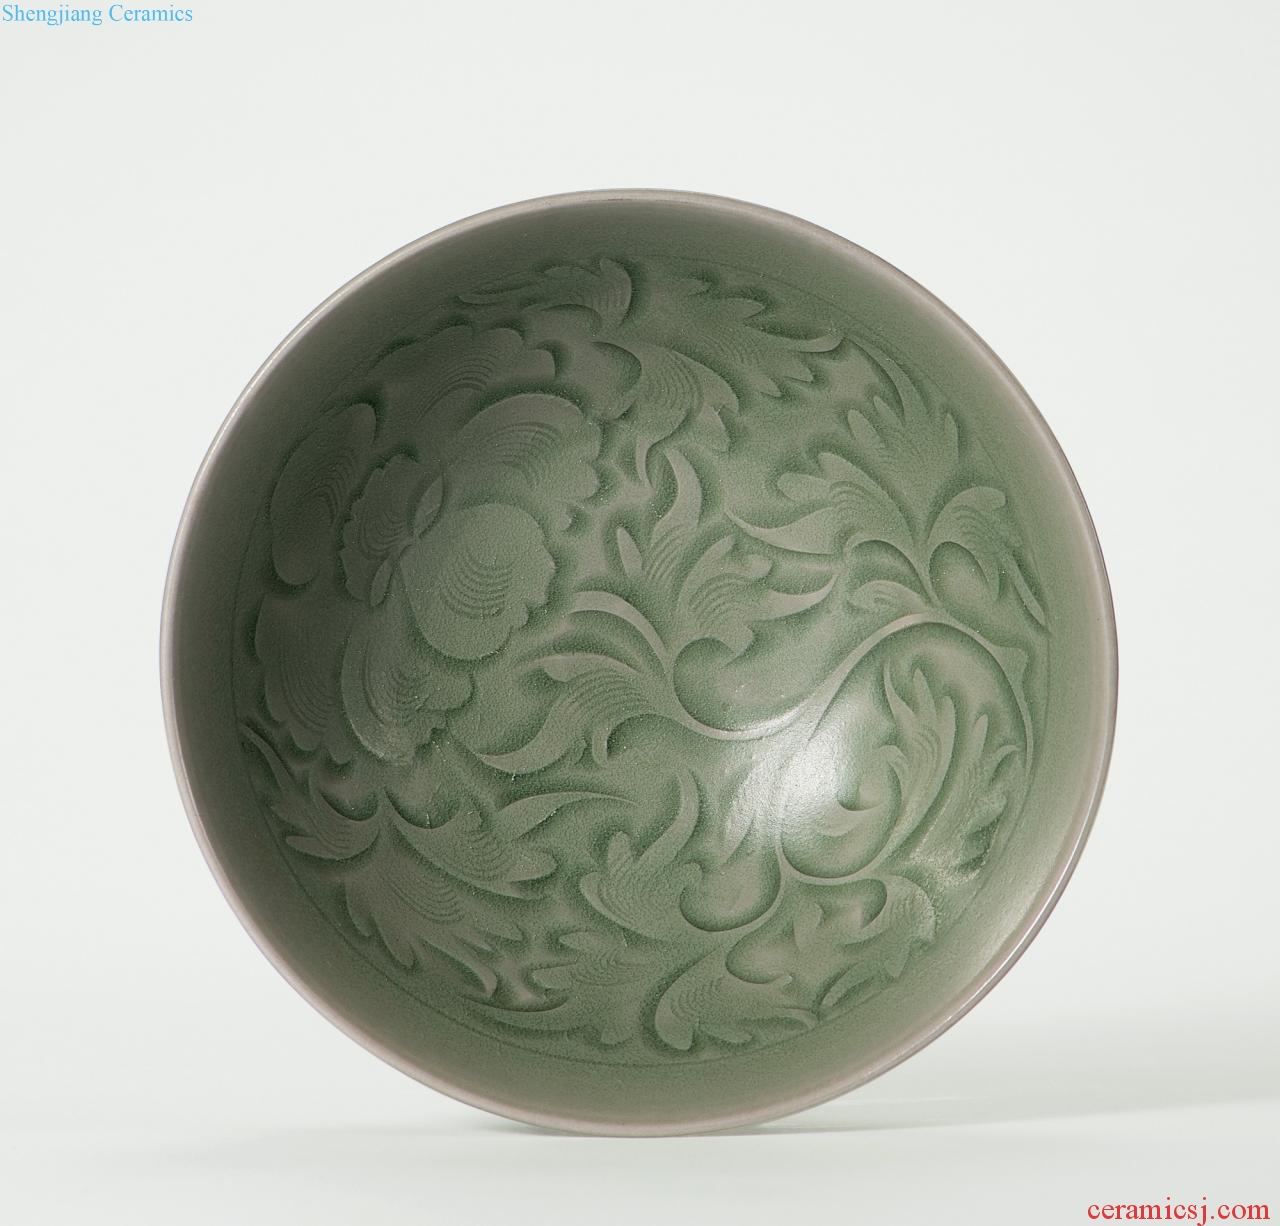 Northern song dynasty Yao state kiln carved flowers green-splashed bowls